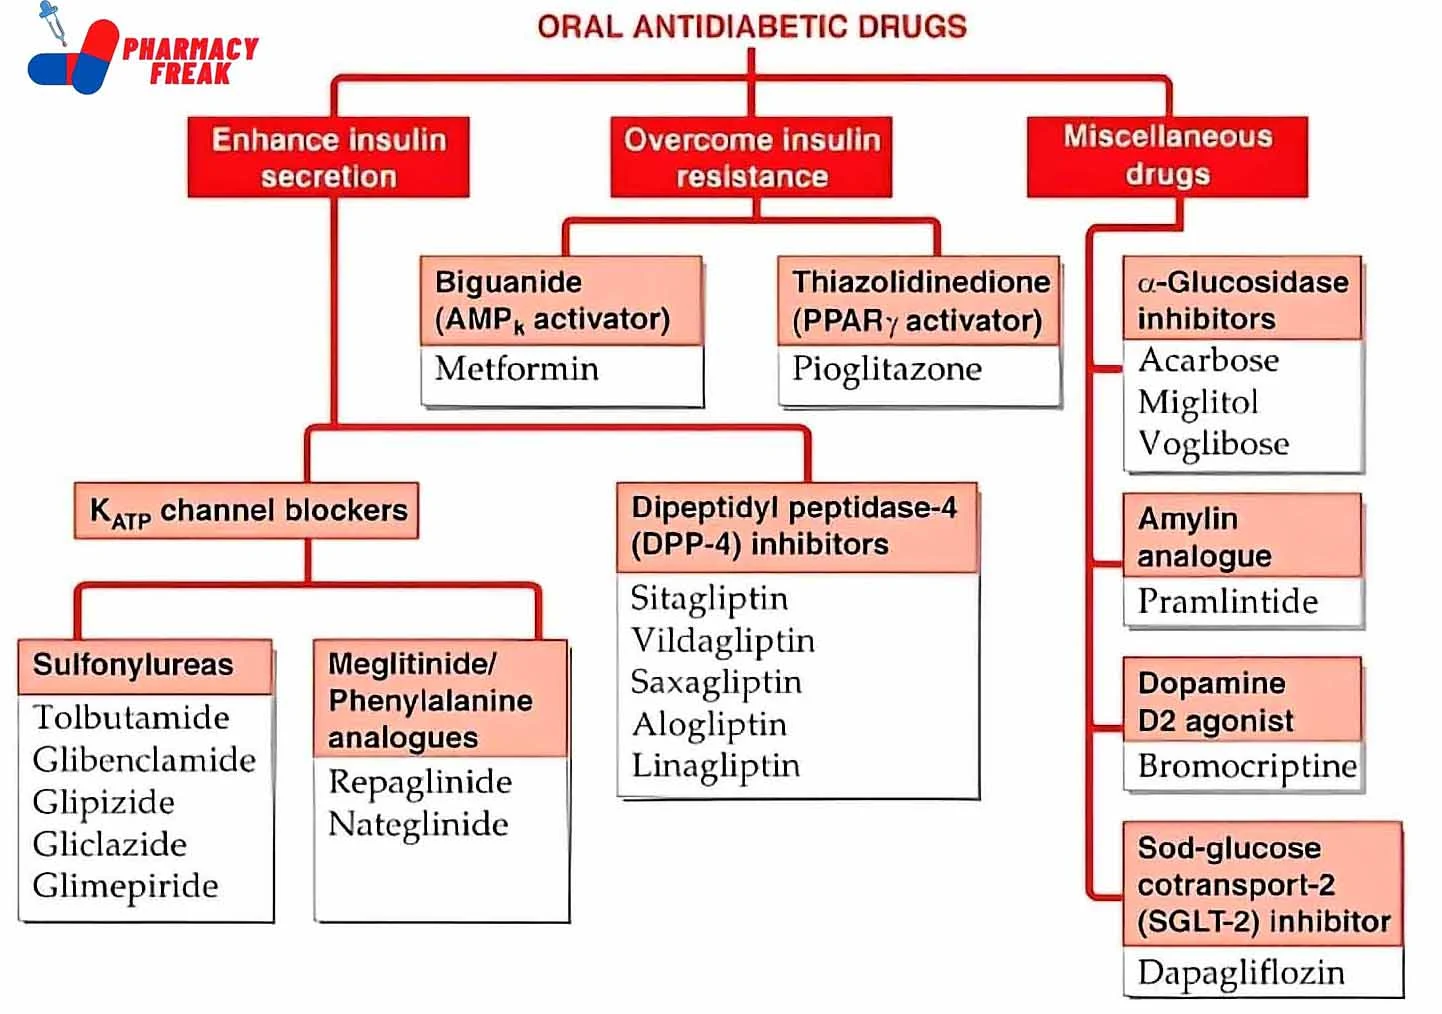 CLASSIFICATION OF ORAL ANTIDIABETIC DRUGS